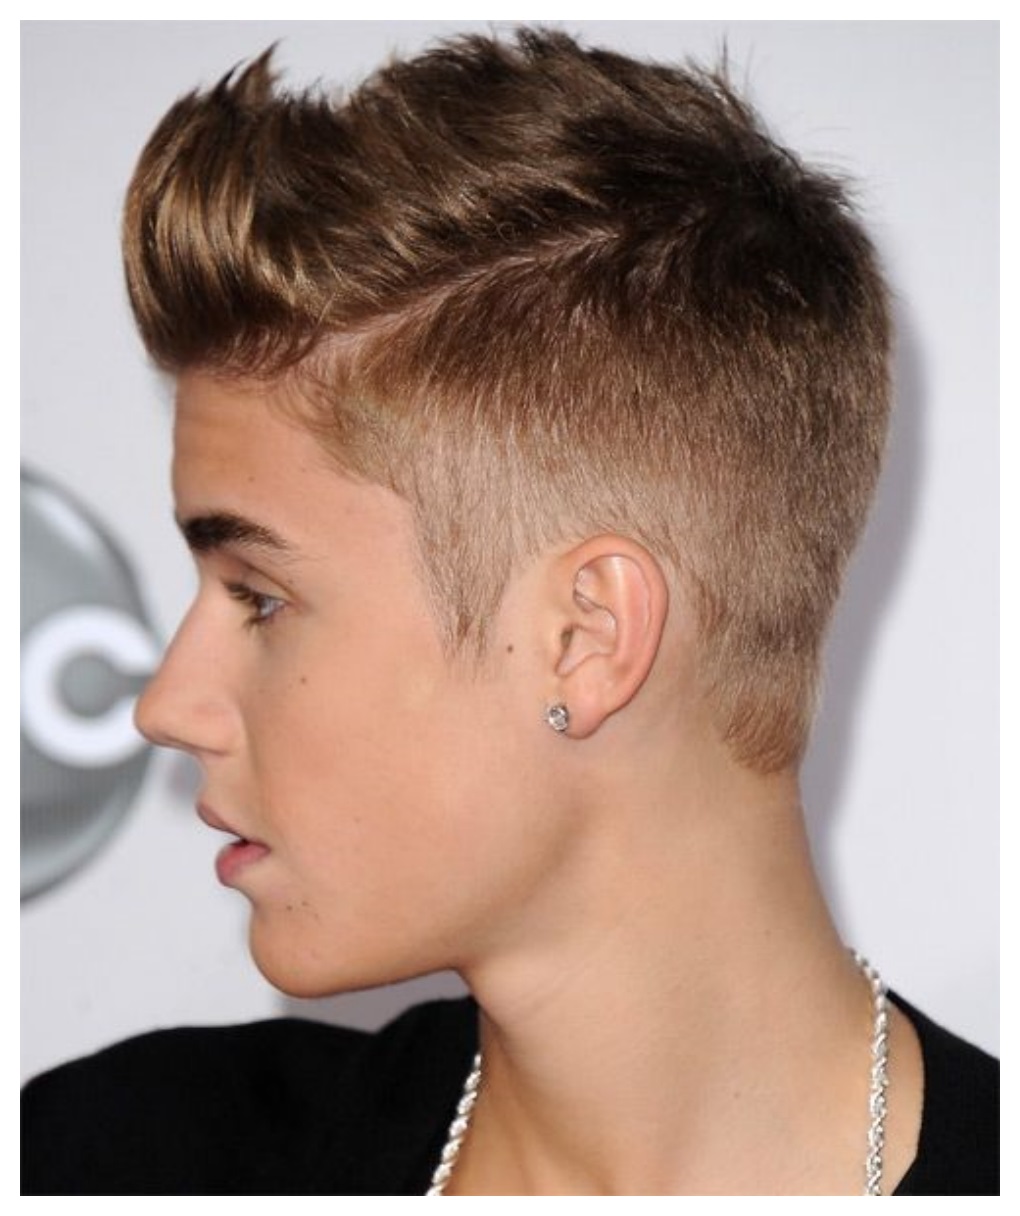 Singer Justin Bieber Haircut Hairstyle for Young boys